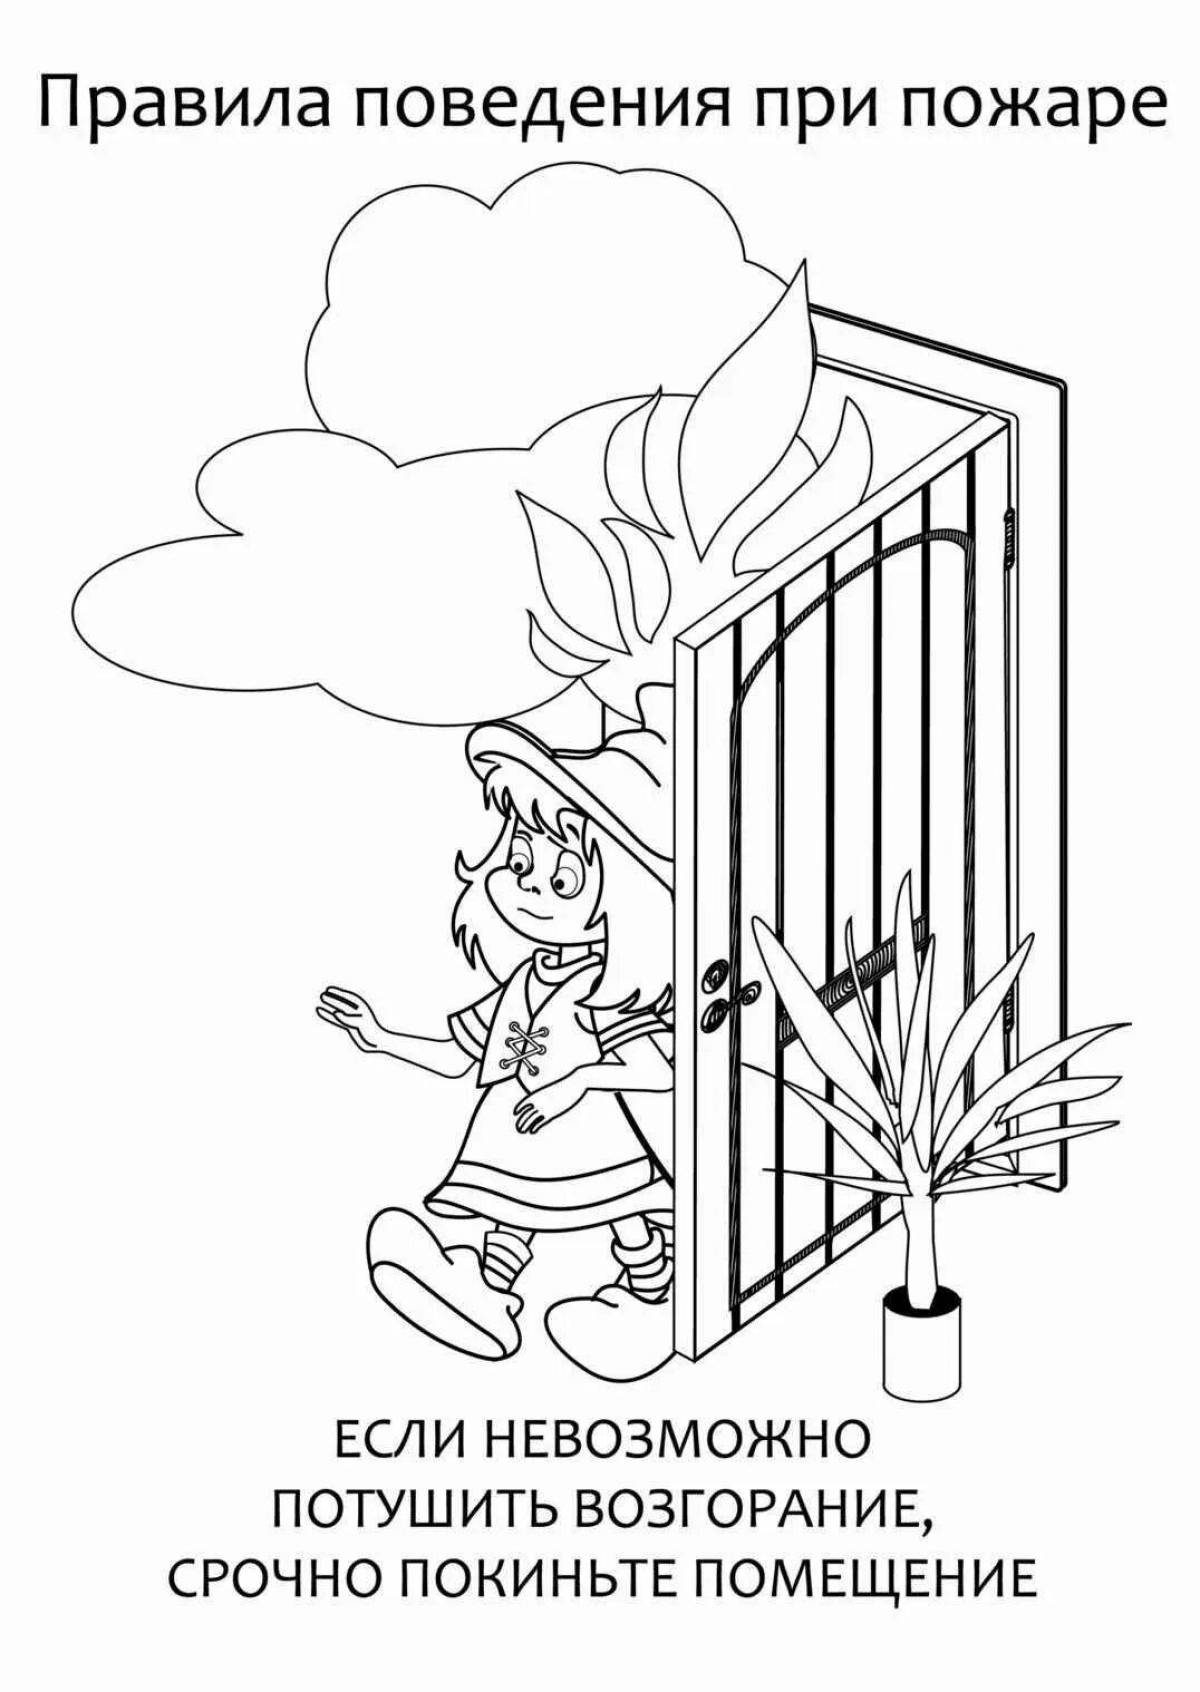 Playful home security coloring page